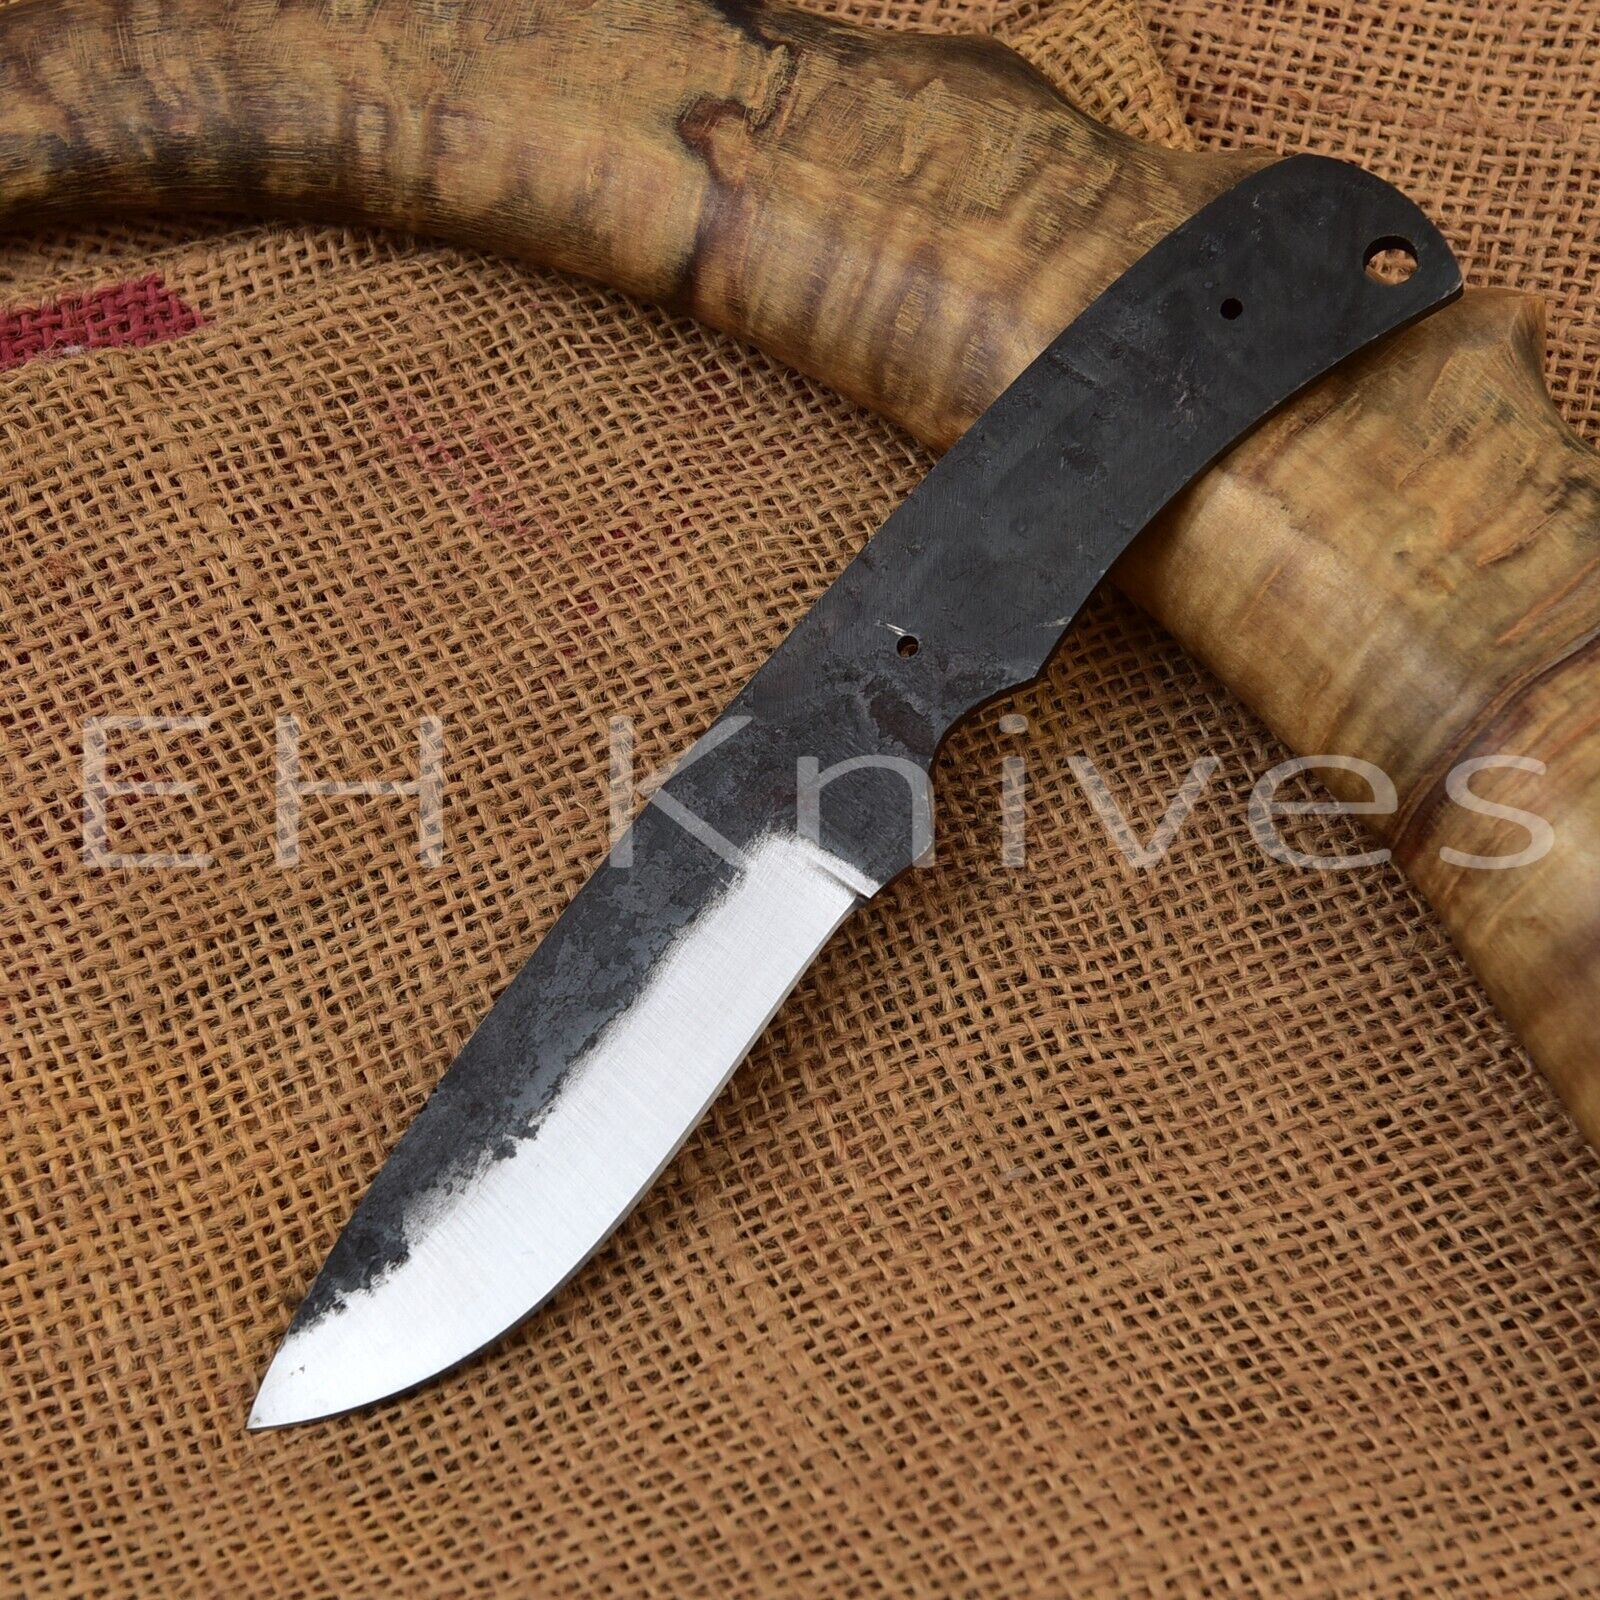 8 INCH CUSTOM FORGED 1095 CARBON STEEL HUNTING SKINNING BLANK BLADE KNIFE 241